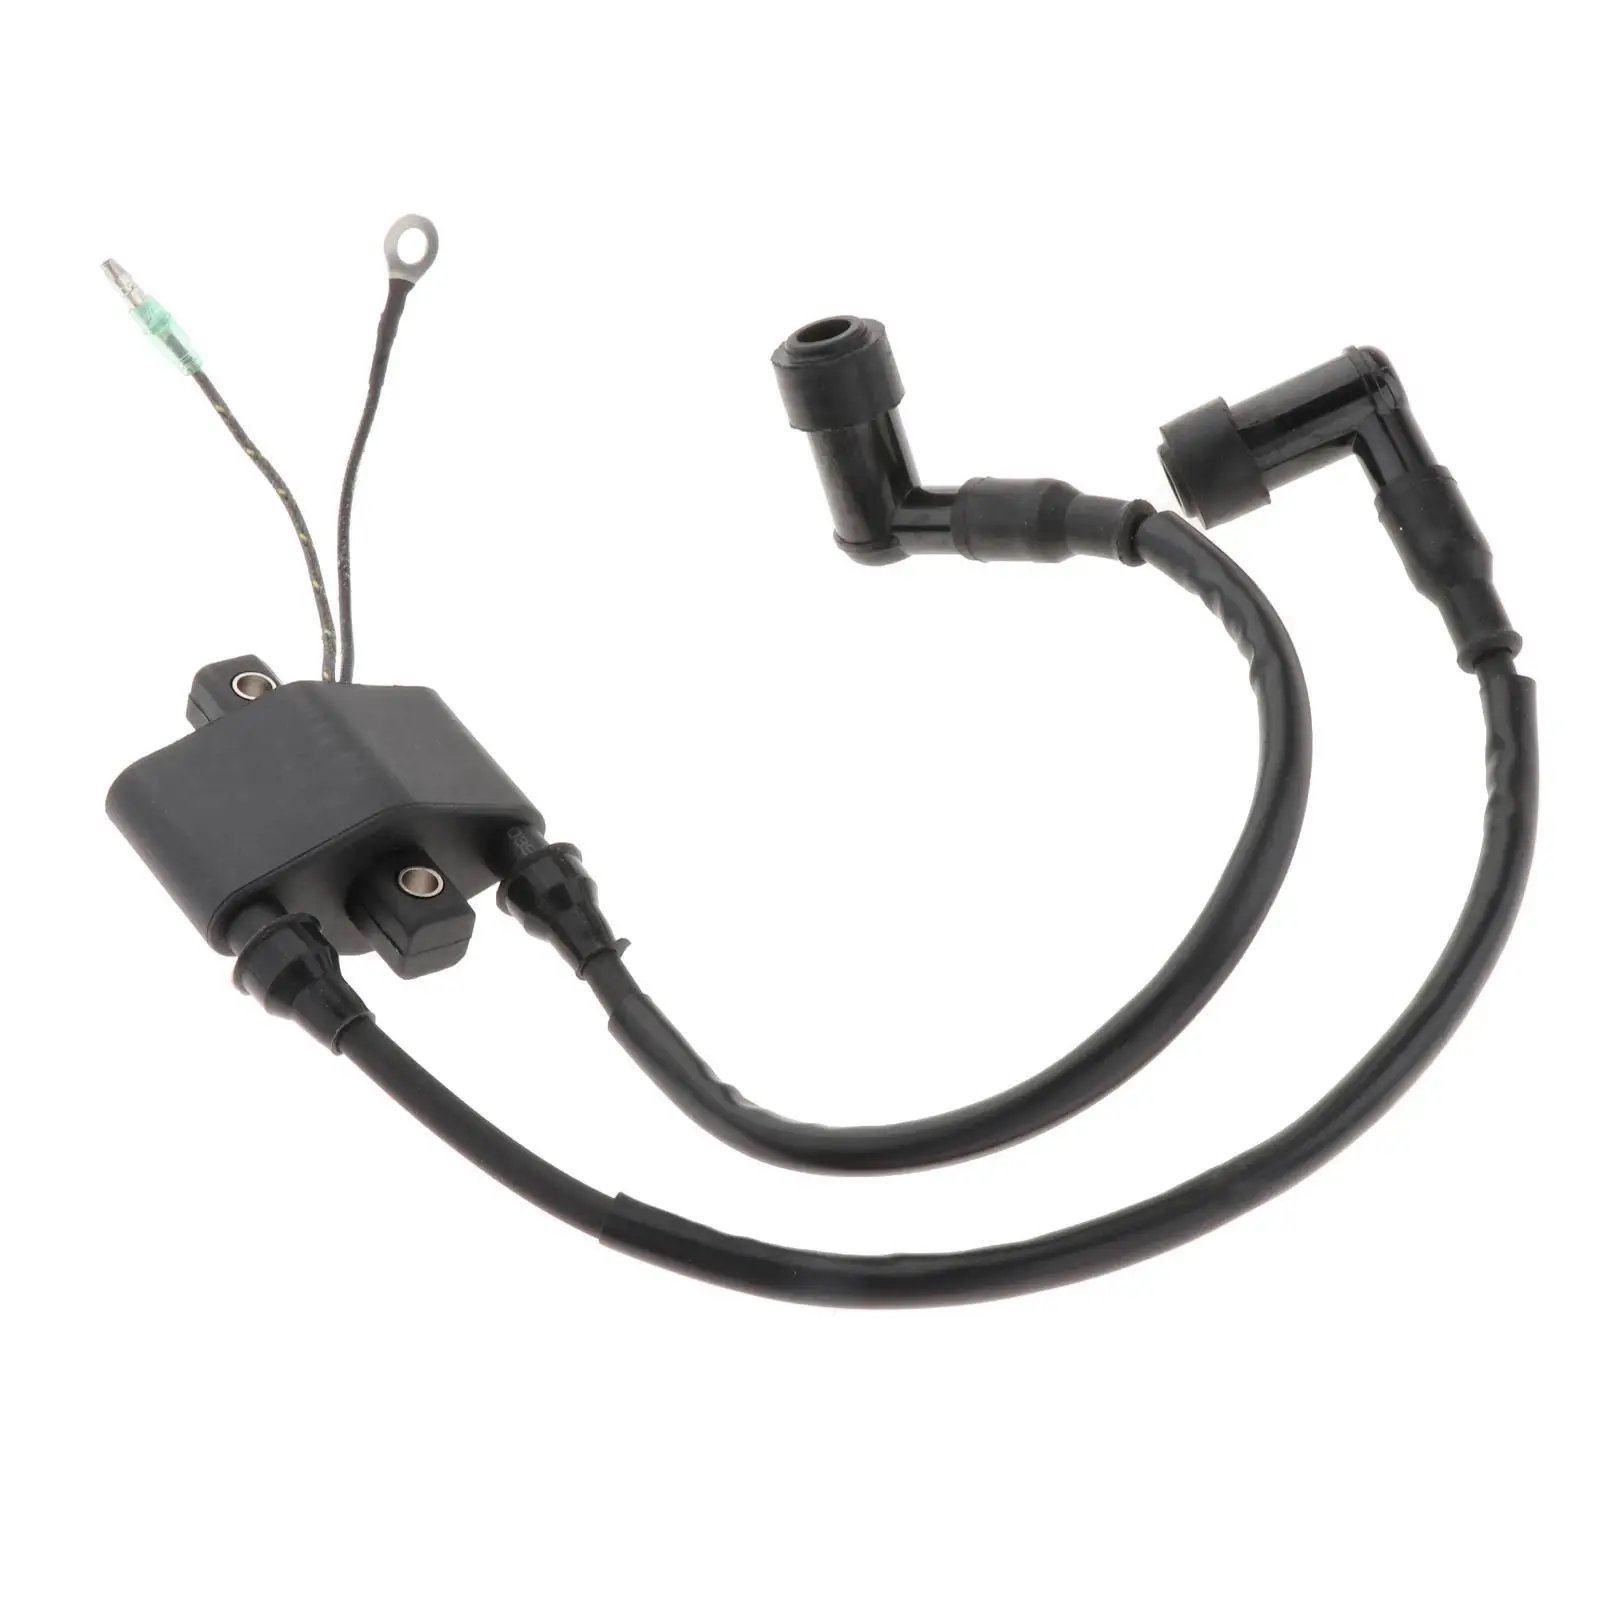 Ignition Coil Accessories Fit for Tohatsu for Nissan Outboard Boat Motor